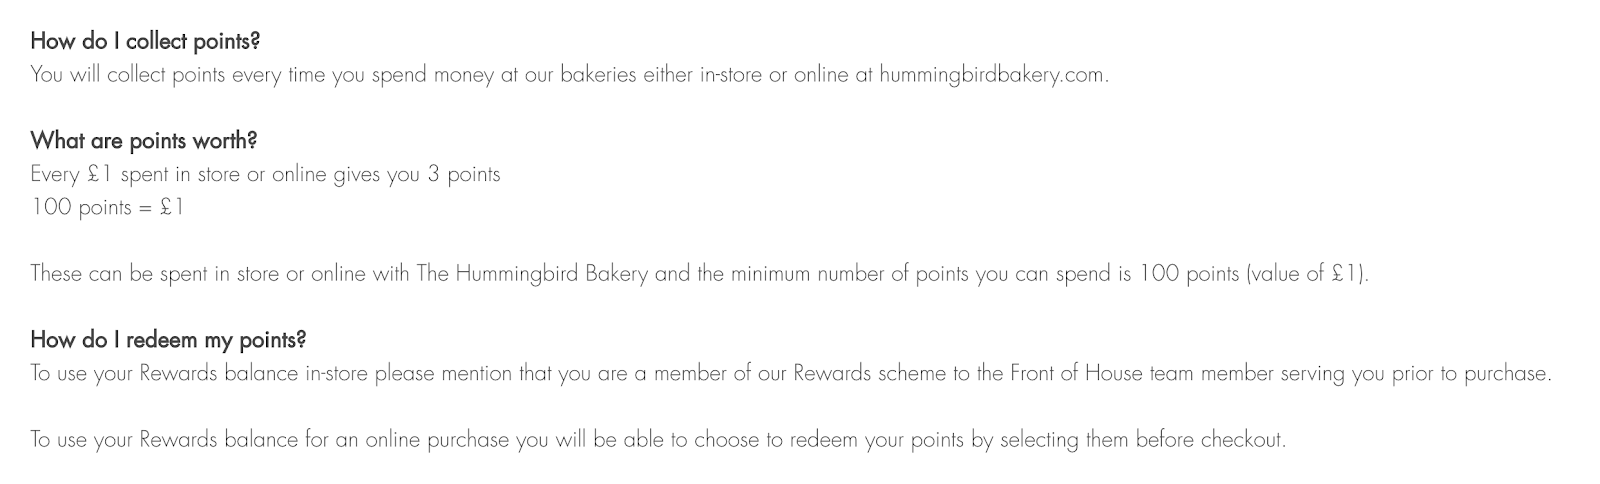 Screenshot of questions about Hummingbird Bakery’s points-based rewards system.